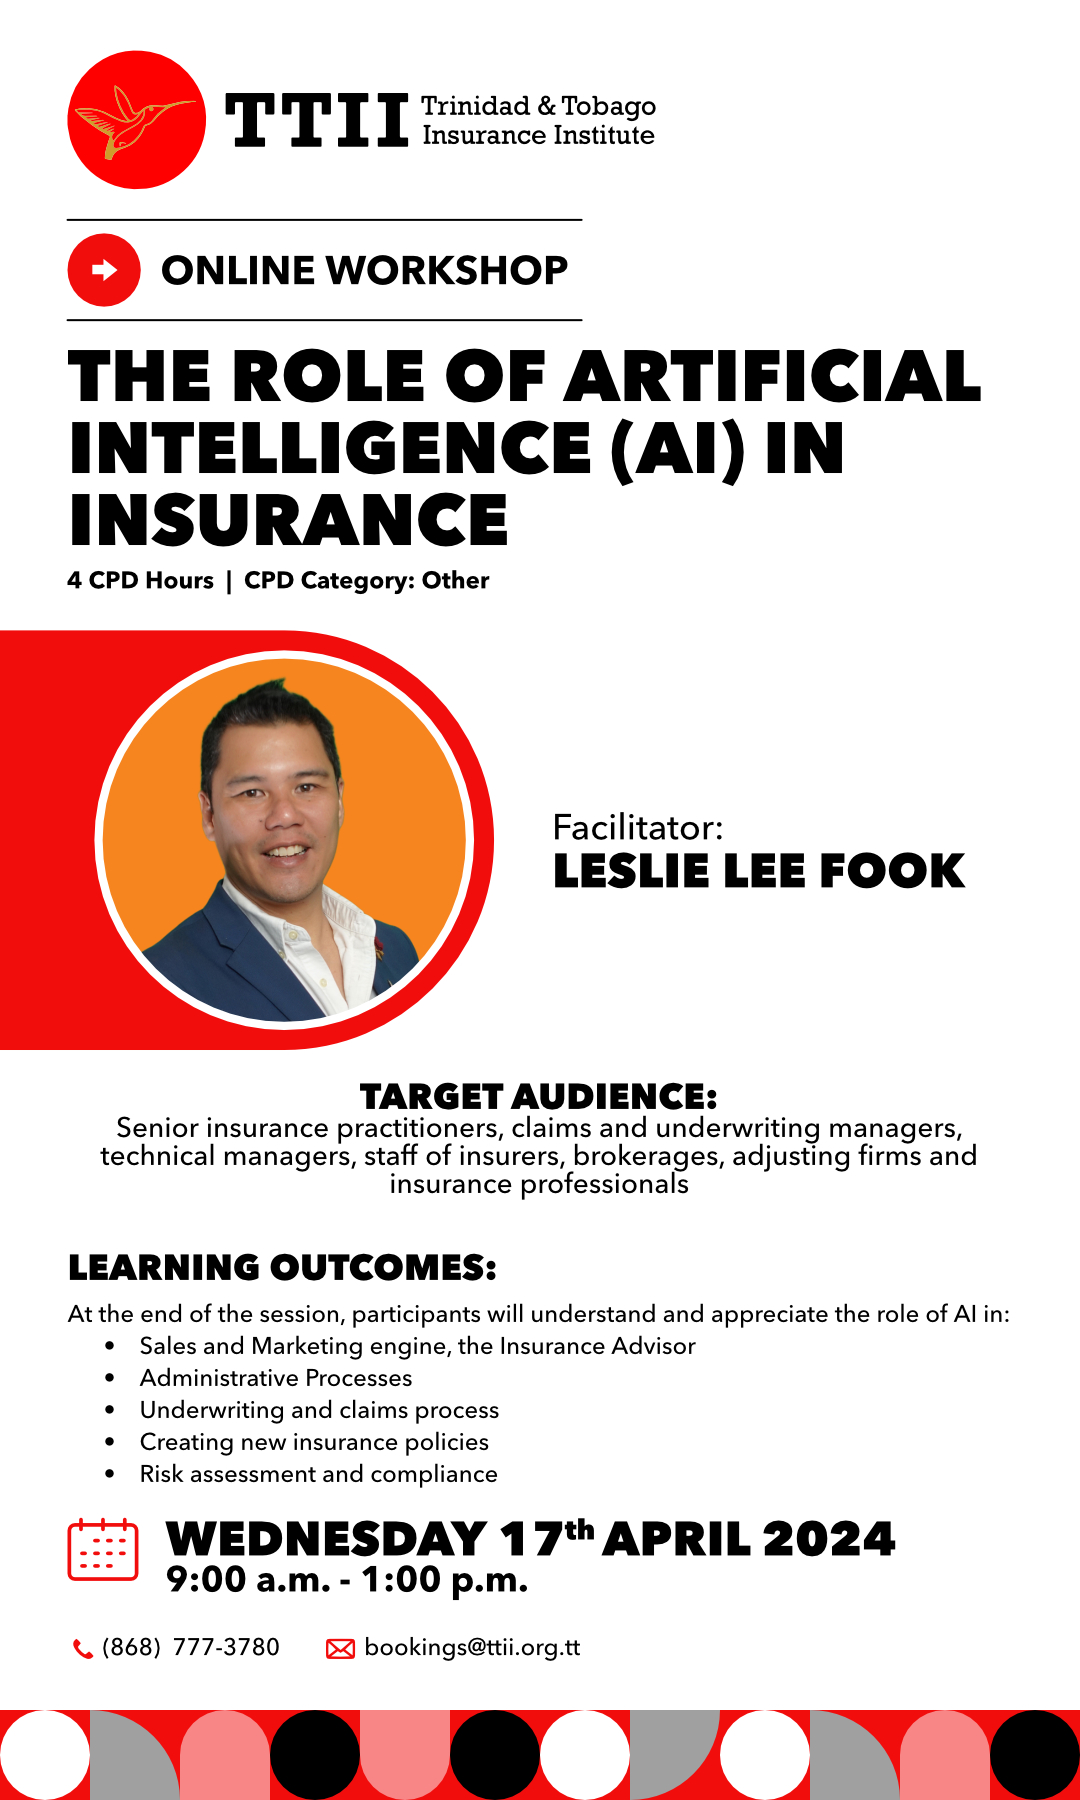 The Role of Artificial Intelligence (AI) in Insurance